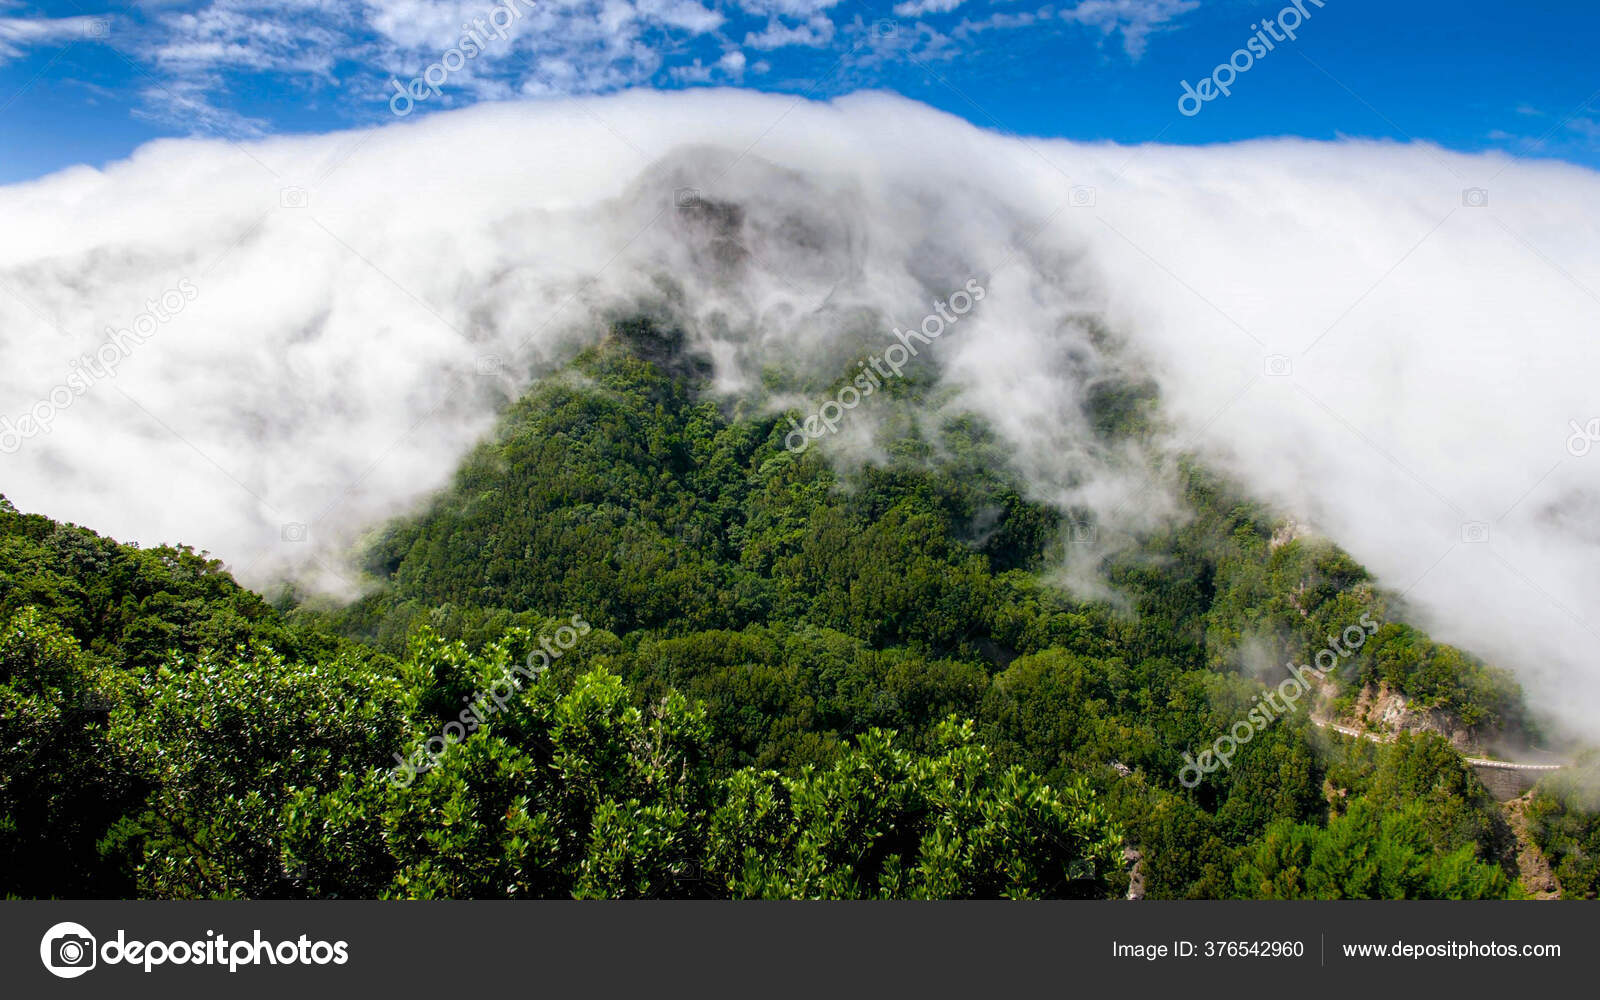 Torpical Forest Stock Photos Royalty Free Torpical Forest Images Depositphotos